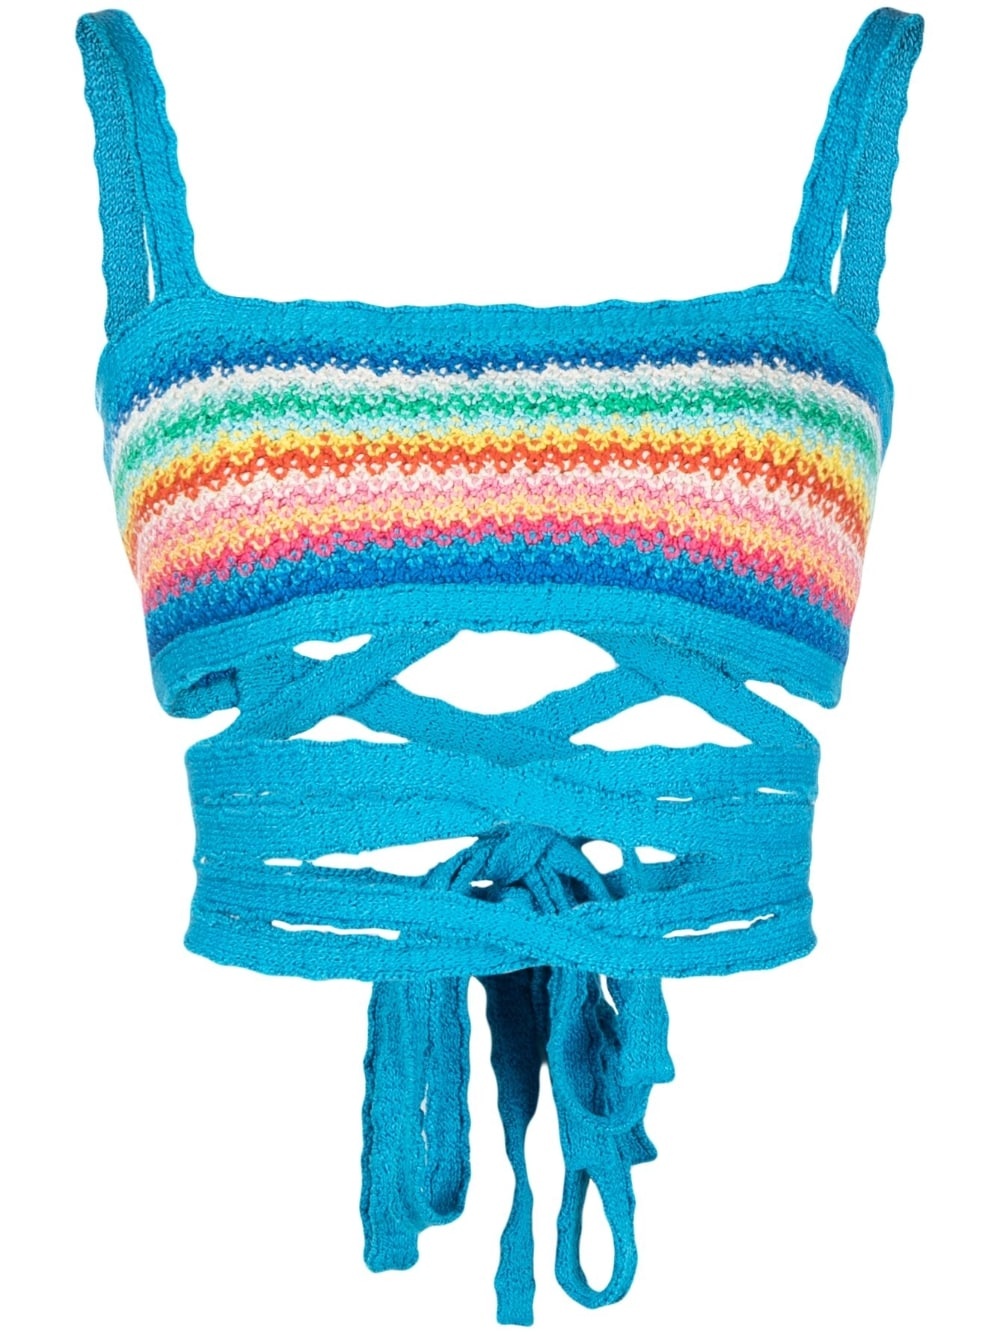 Over The Rainbow knitted bra - 1